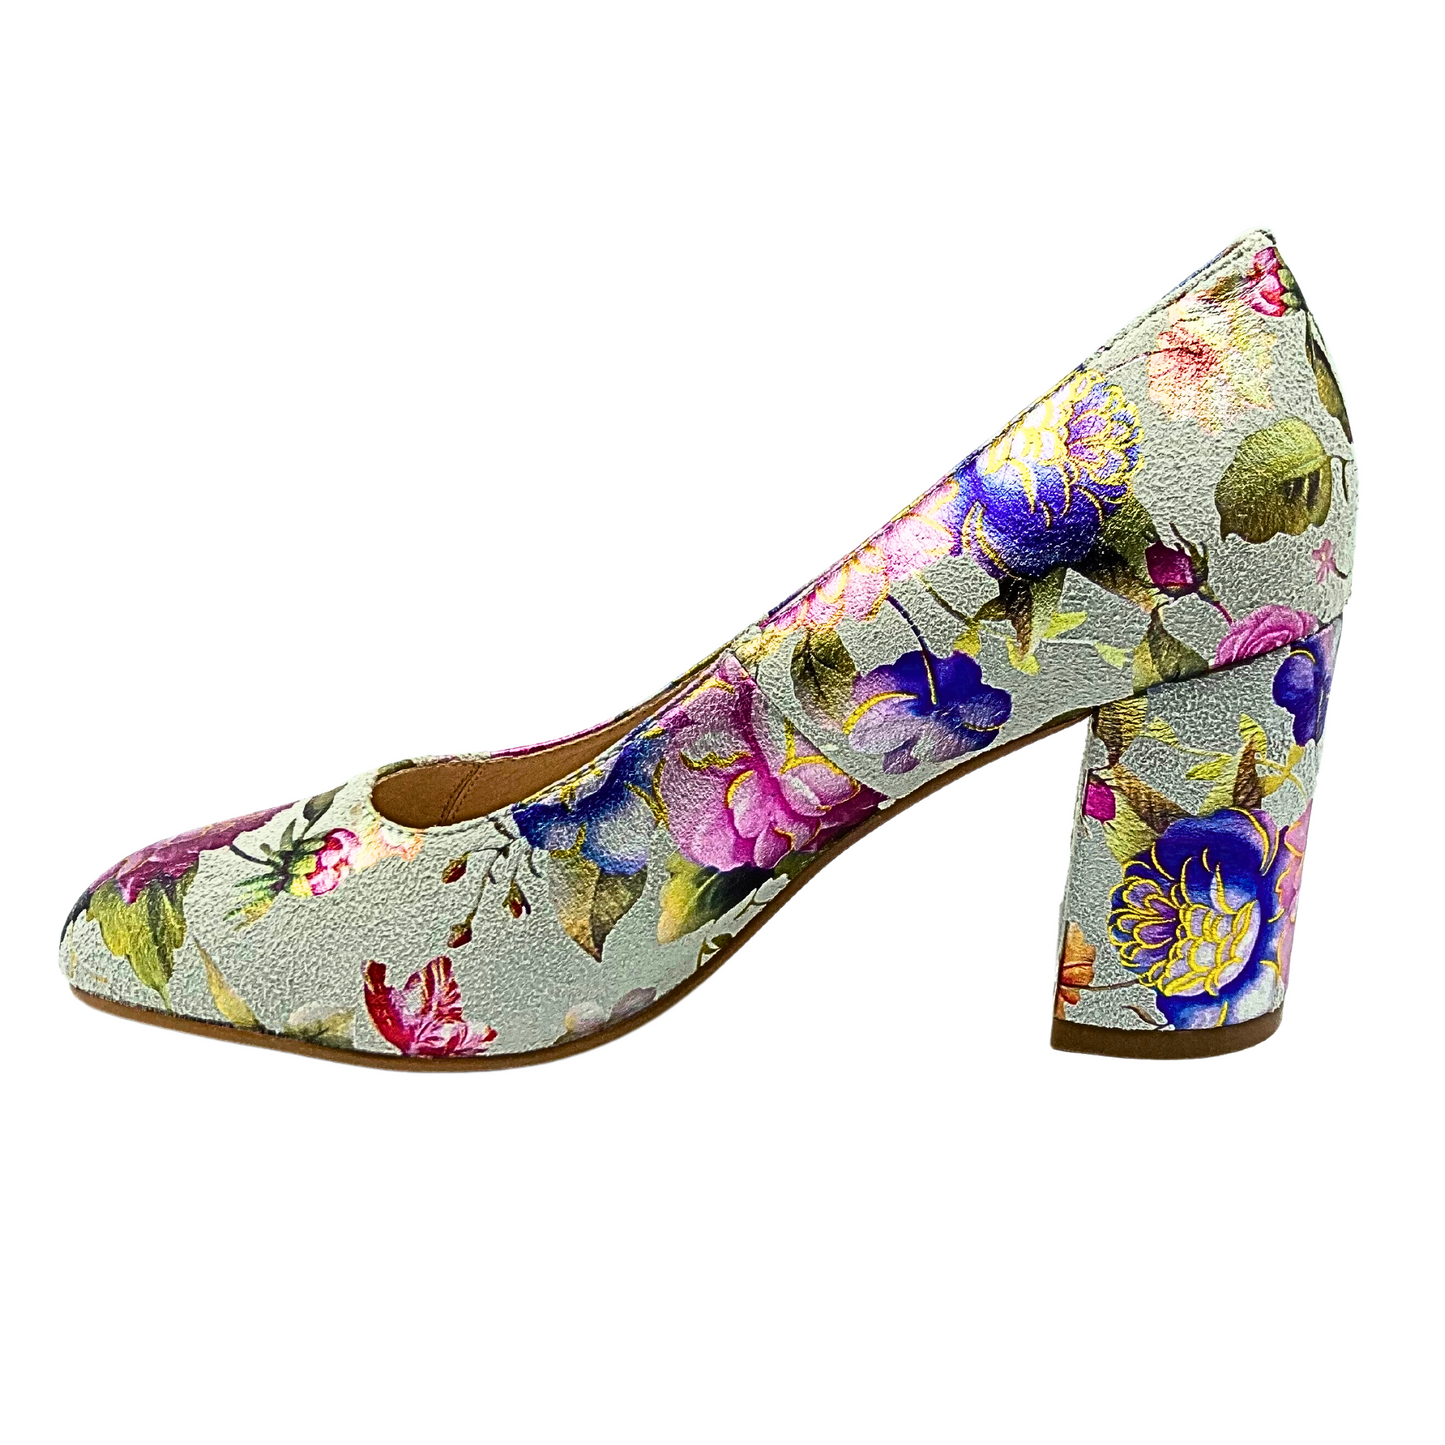 Inside view of a ladies pump shoe with a medium block heel.  Softly rounded toe.  Cream leater with paintee floral details in pinks/purples/yellow